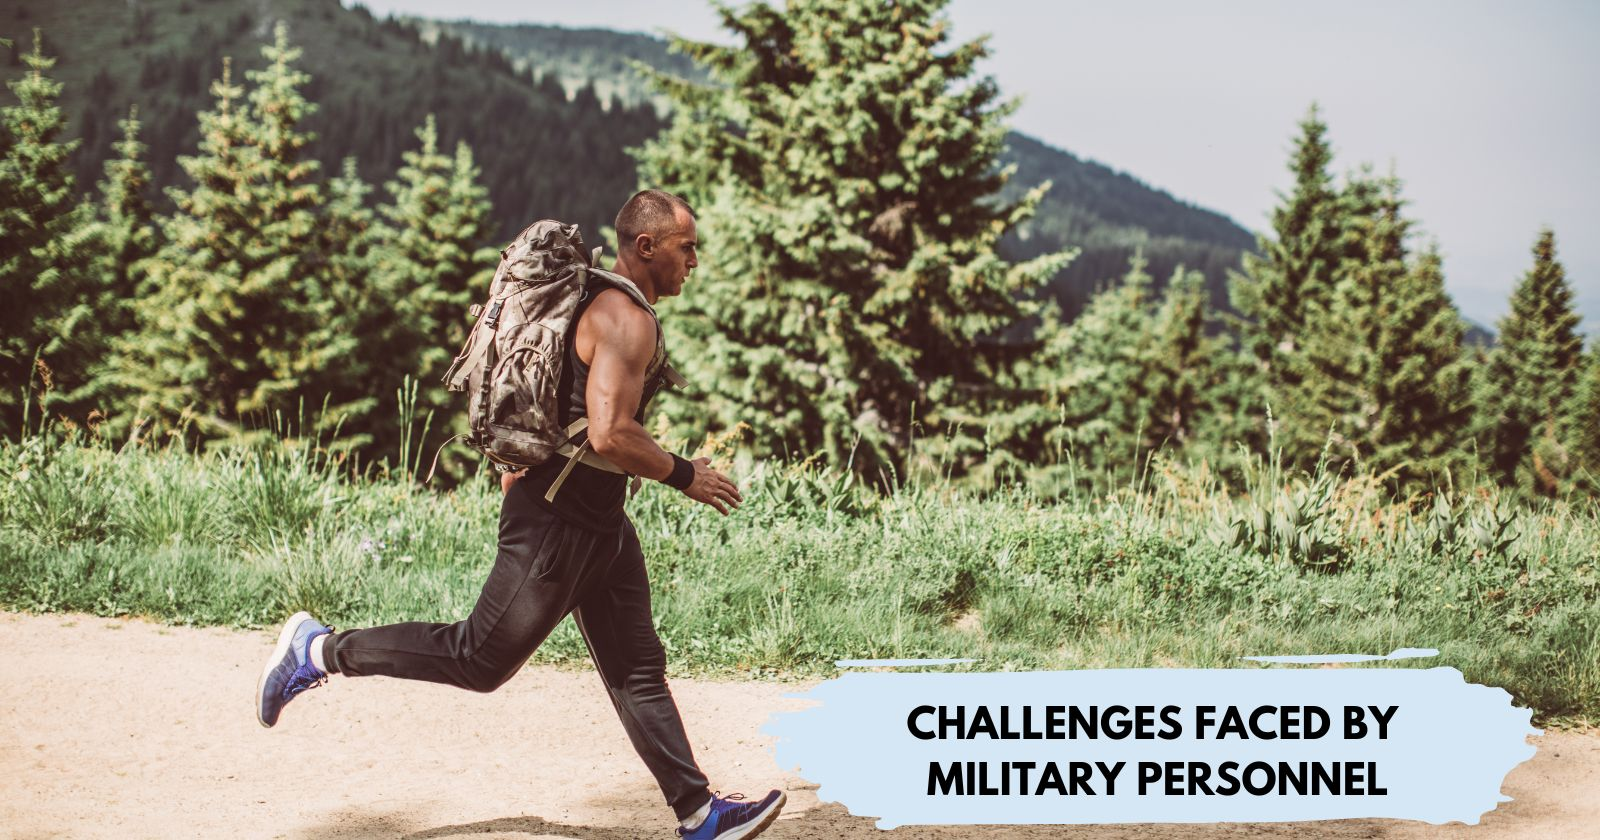 Challenges Faced by Military Personnel

Male veteran running in jungle